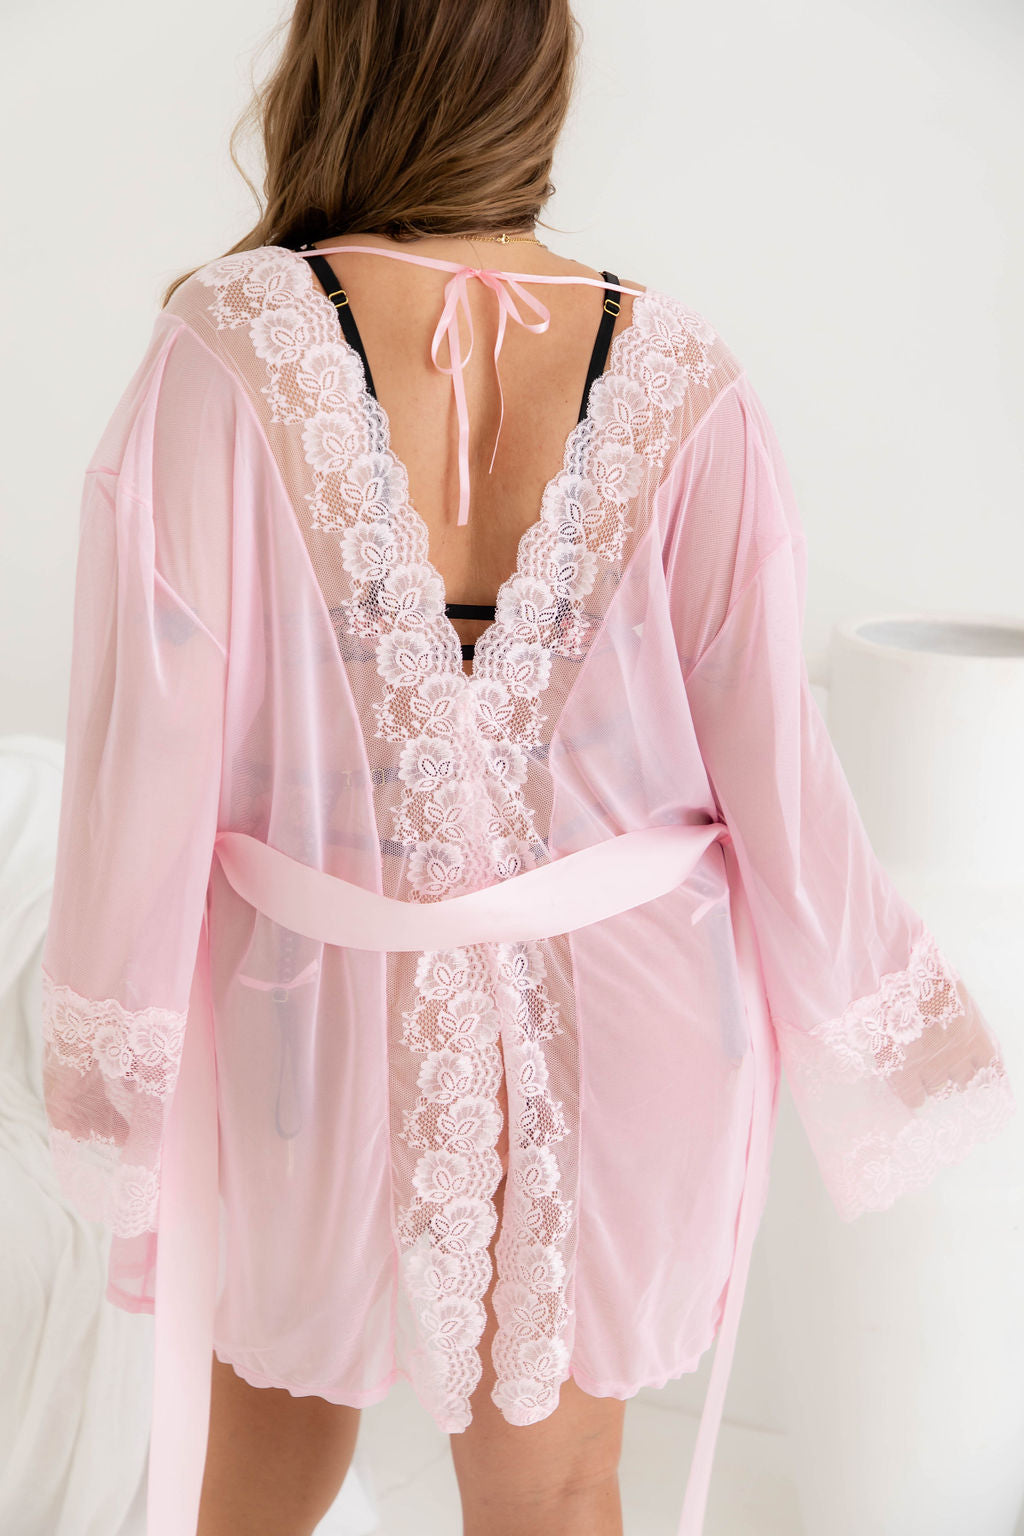 Paris Pink Lace Robe - $64.00 - Robe - Naked Curve